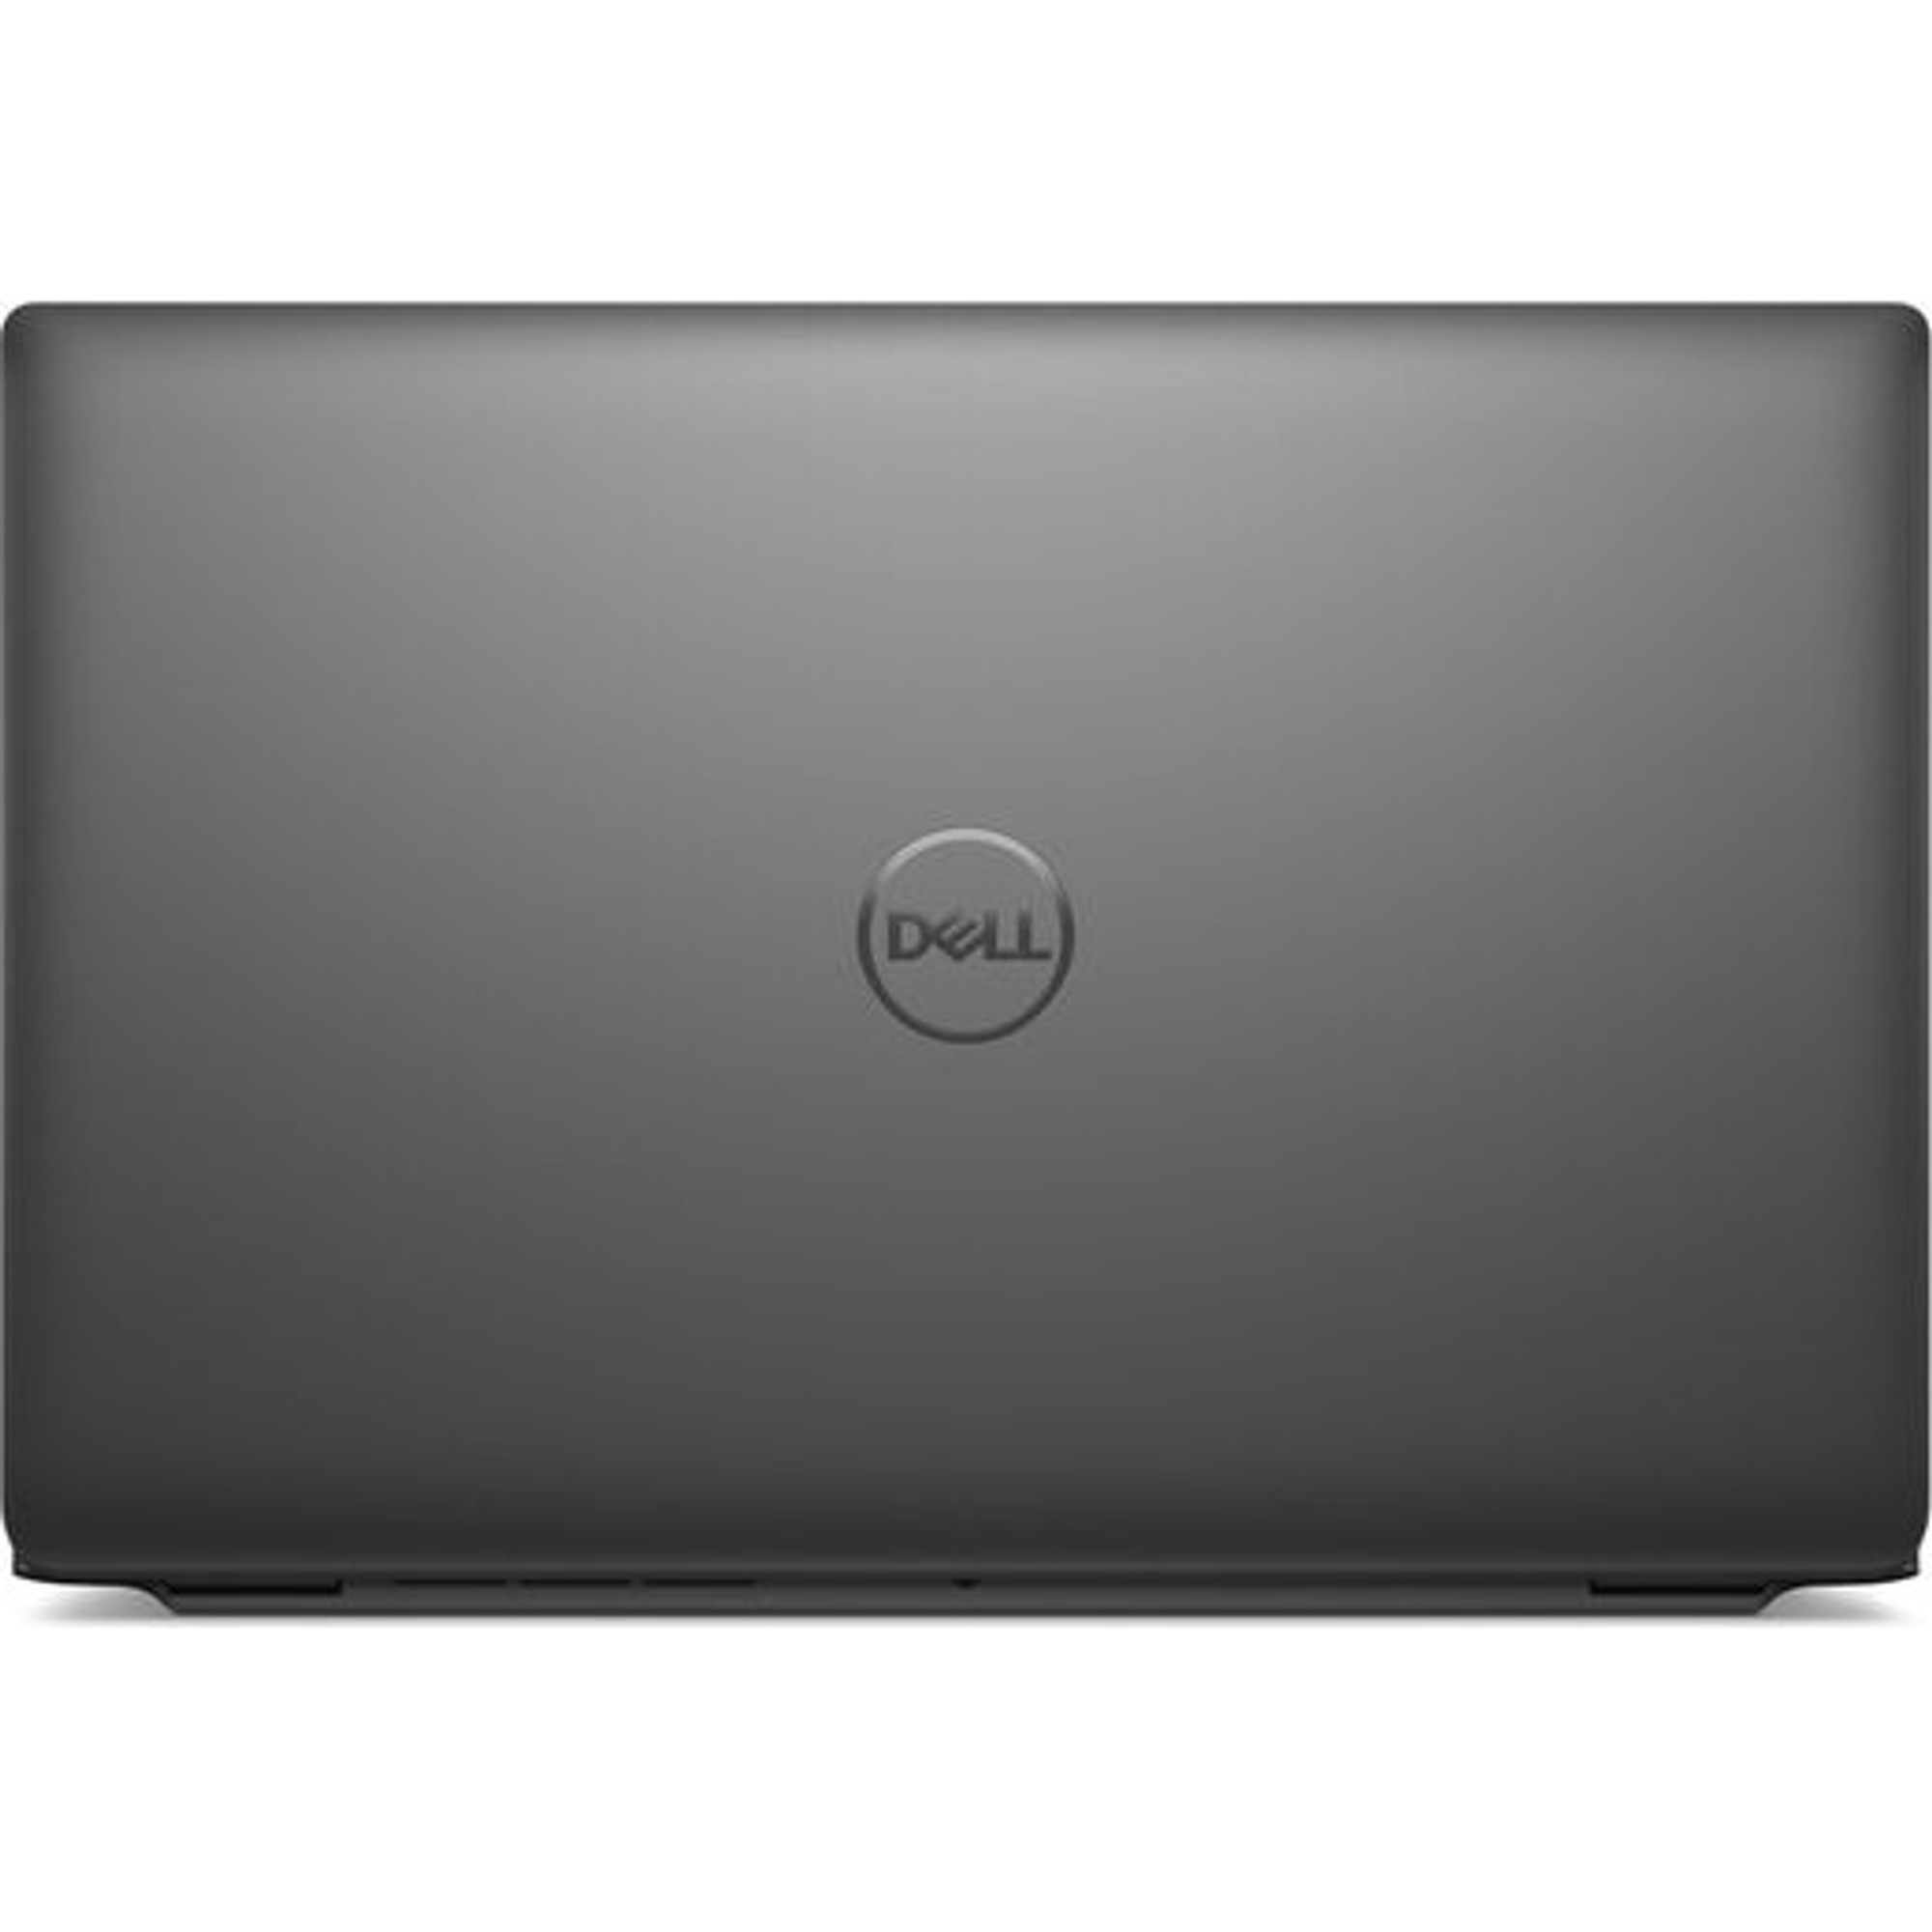 DELL L3540-21 Laptop / Notebook 7